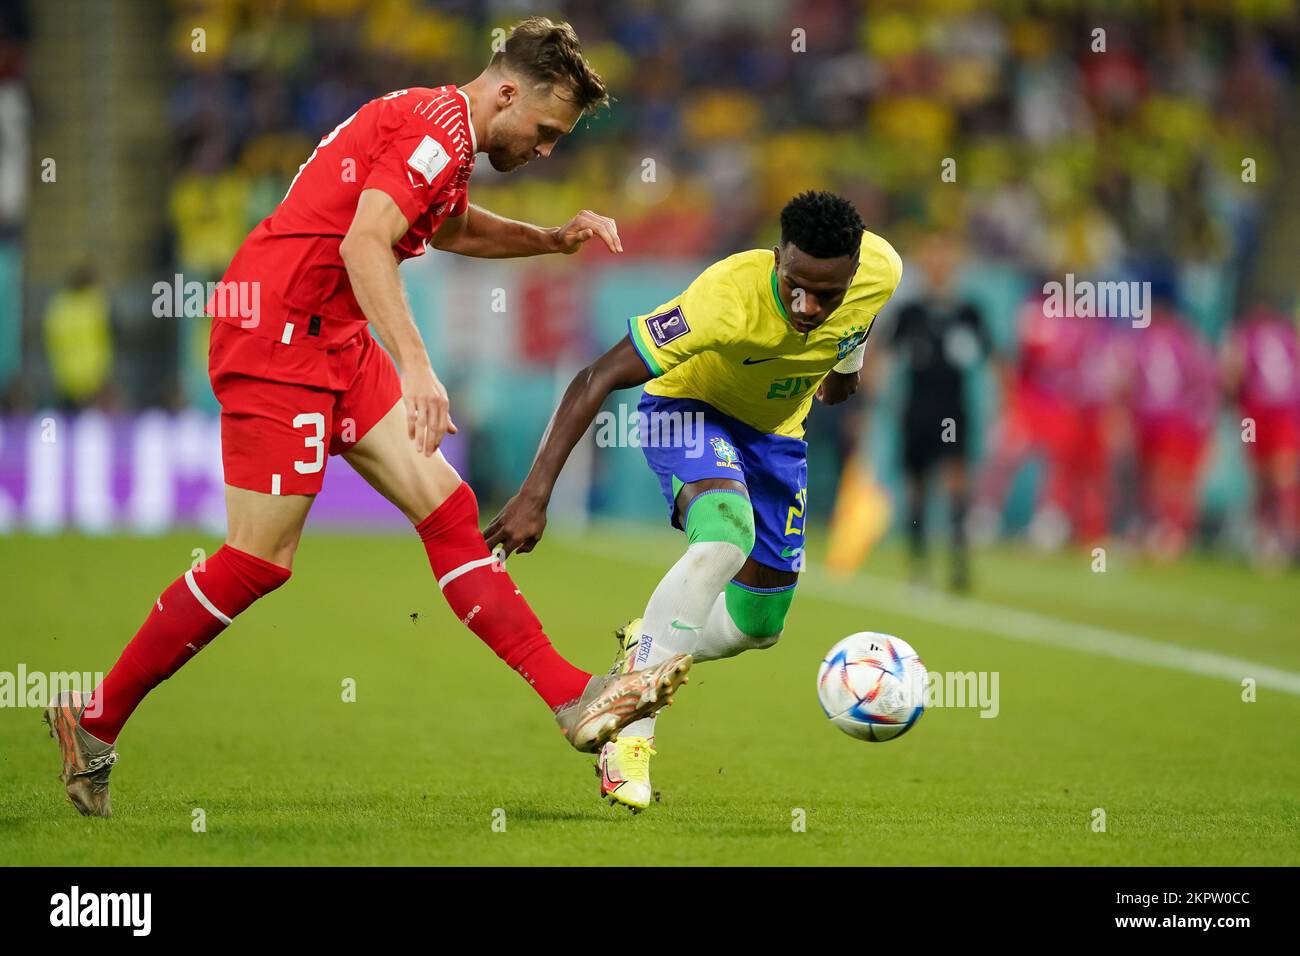 DOHA, QATAR - NOVEMBER 28: Player of Brazil Vinícius Júnior fights for the ball with player of Switzerland Silvan Widmer during the FIFA World Cup Qatar 2022 group G match between Brazil and Switzerland at Stadium 974 on November 28, 2022 in Doha, Qatar. (Photo by Florencia Tan Jun/PxImages) Stock Photo